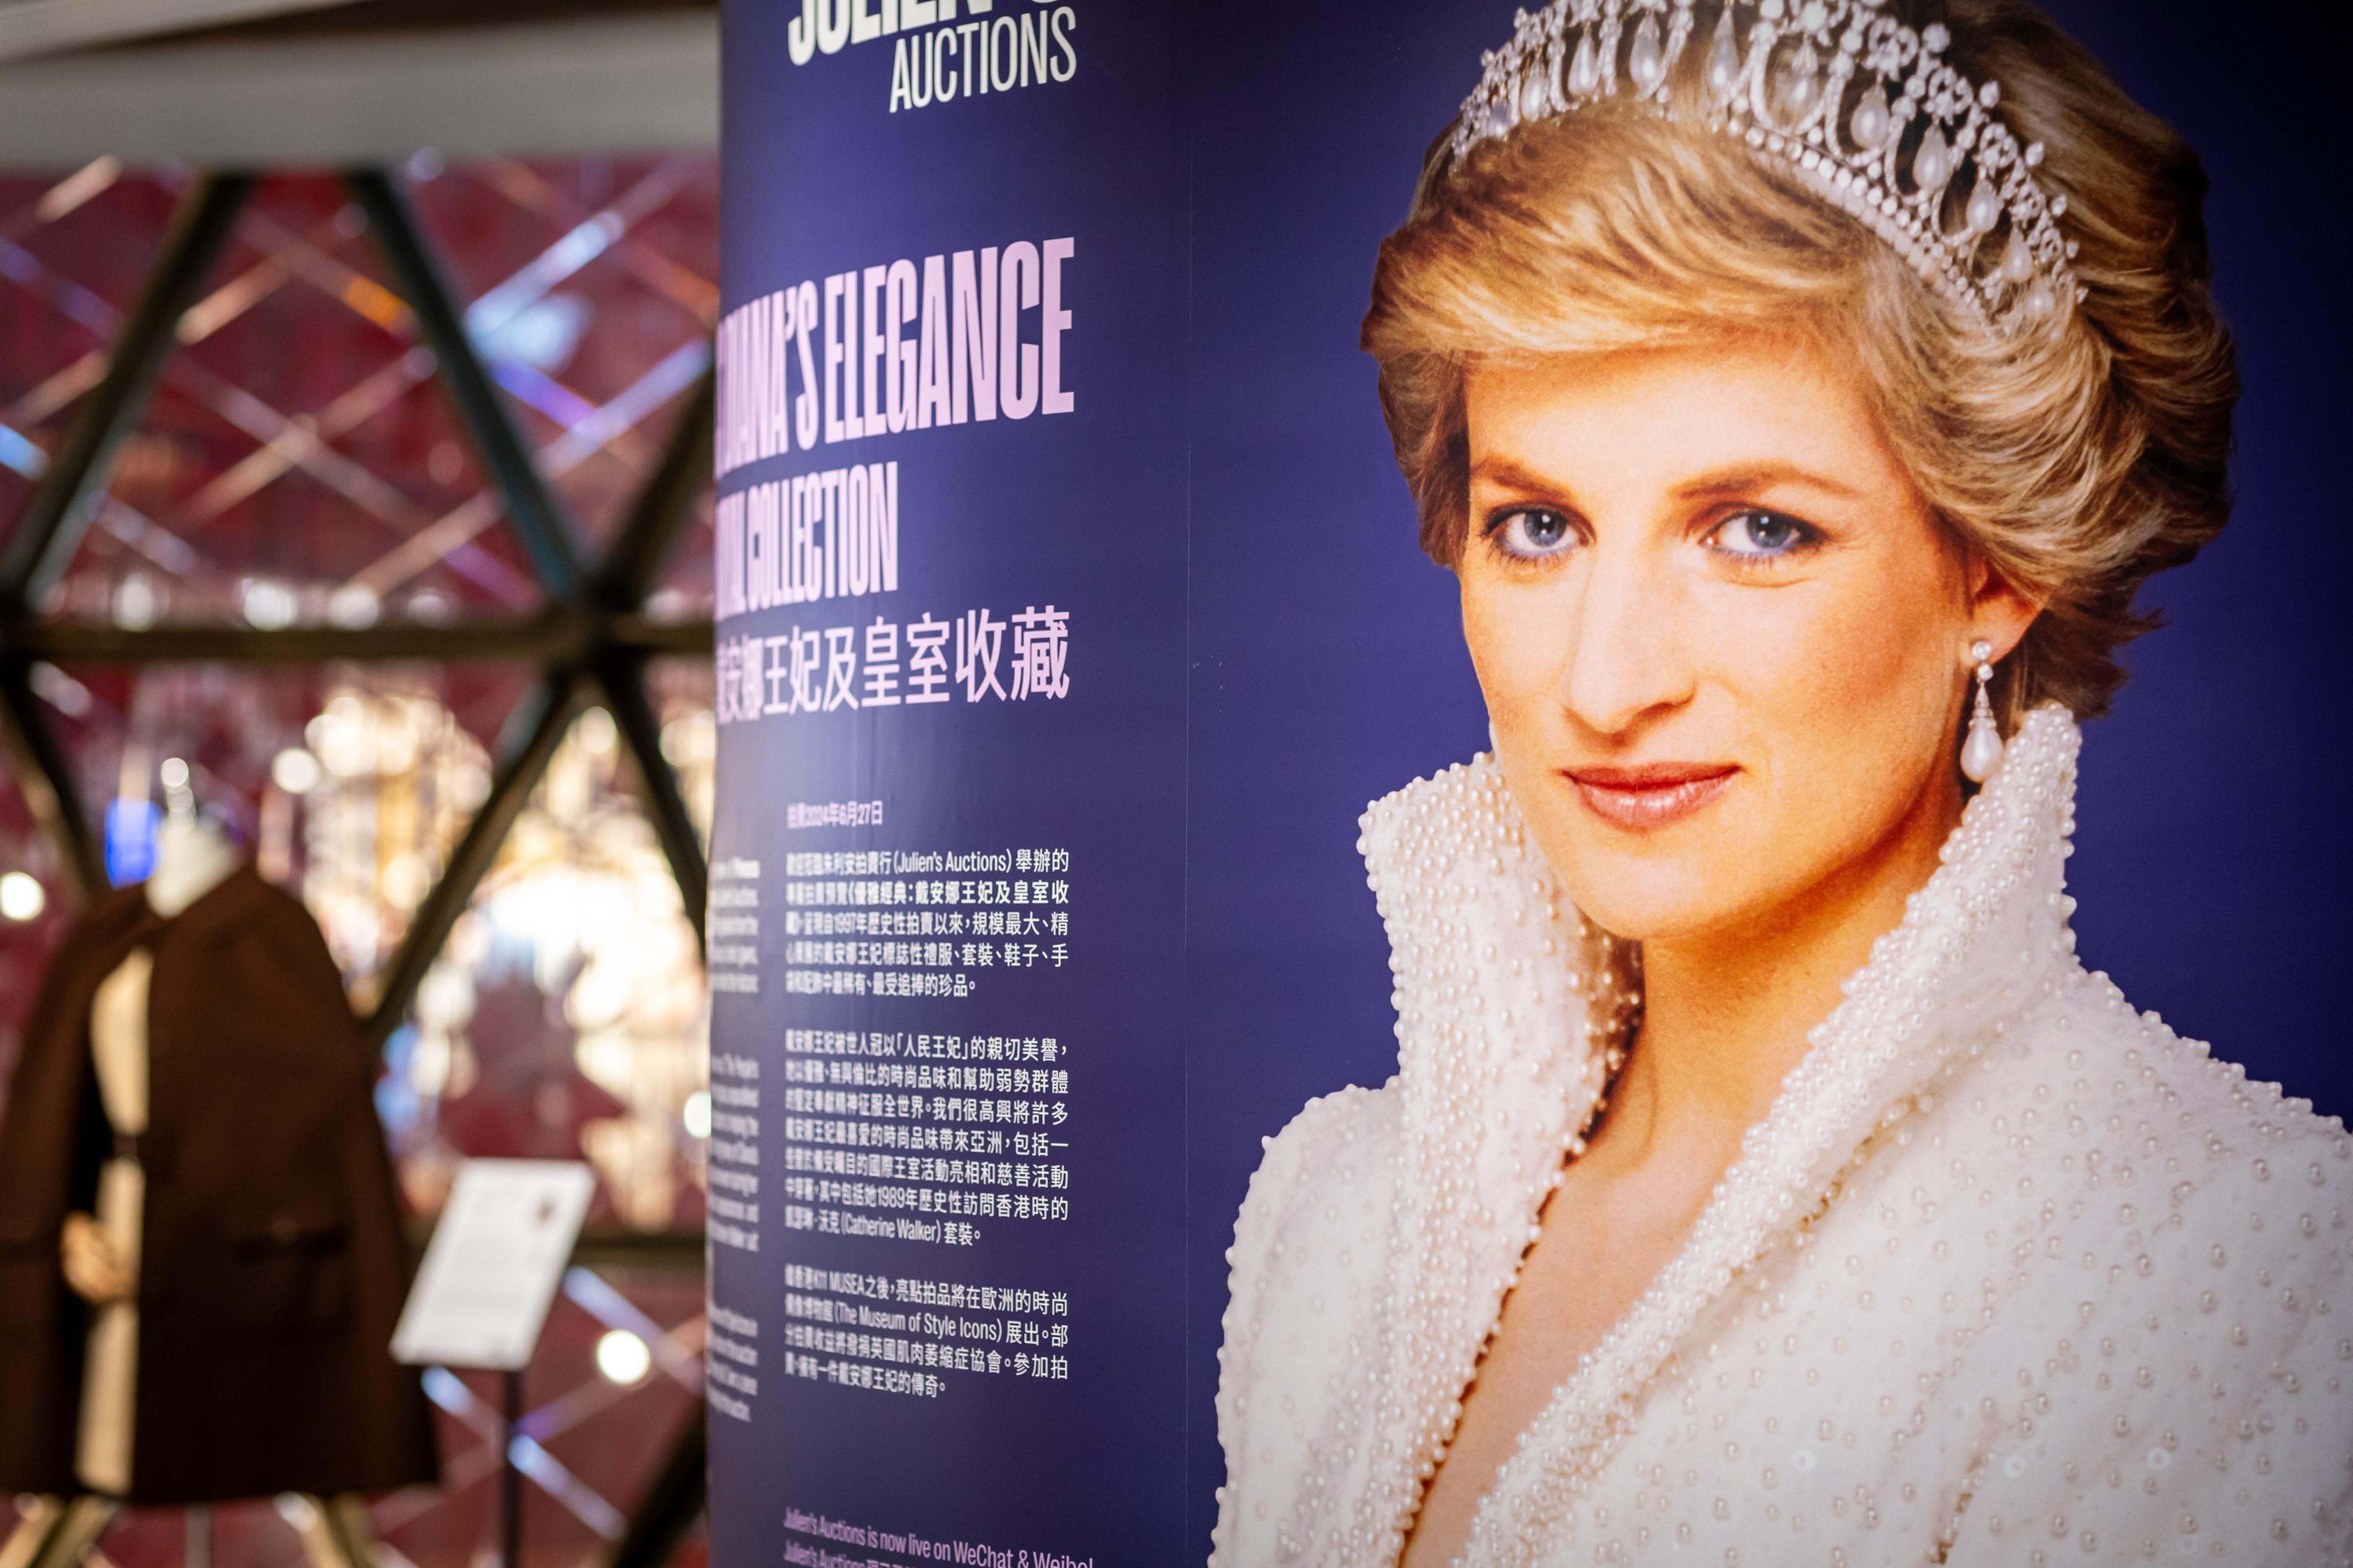 A wall text featuring a large portrait of Princess Diana